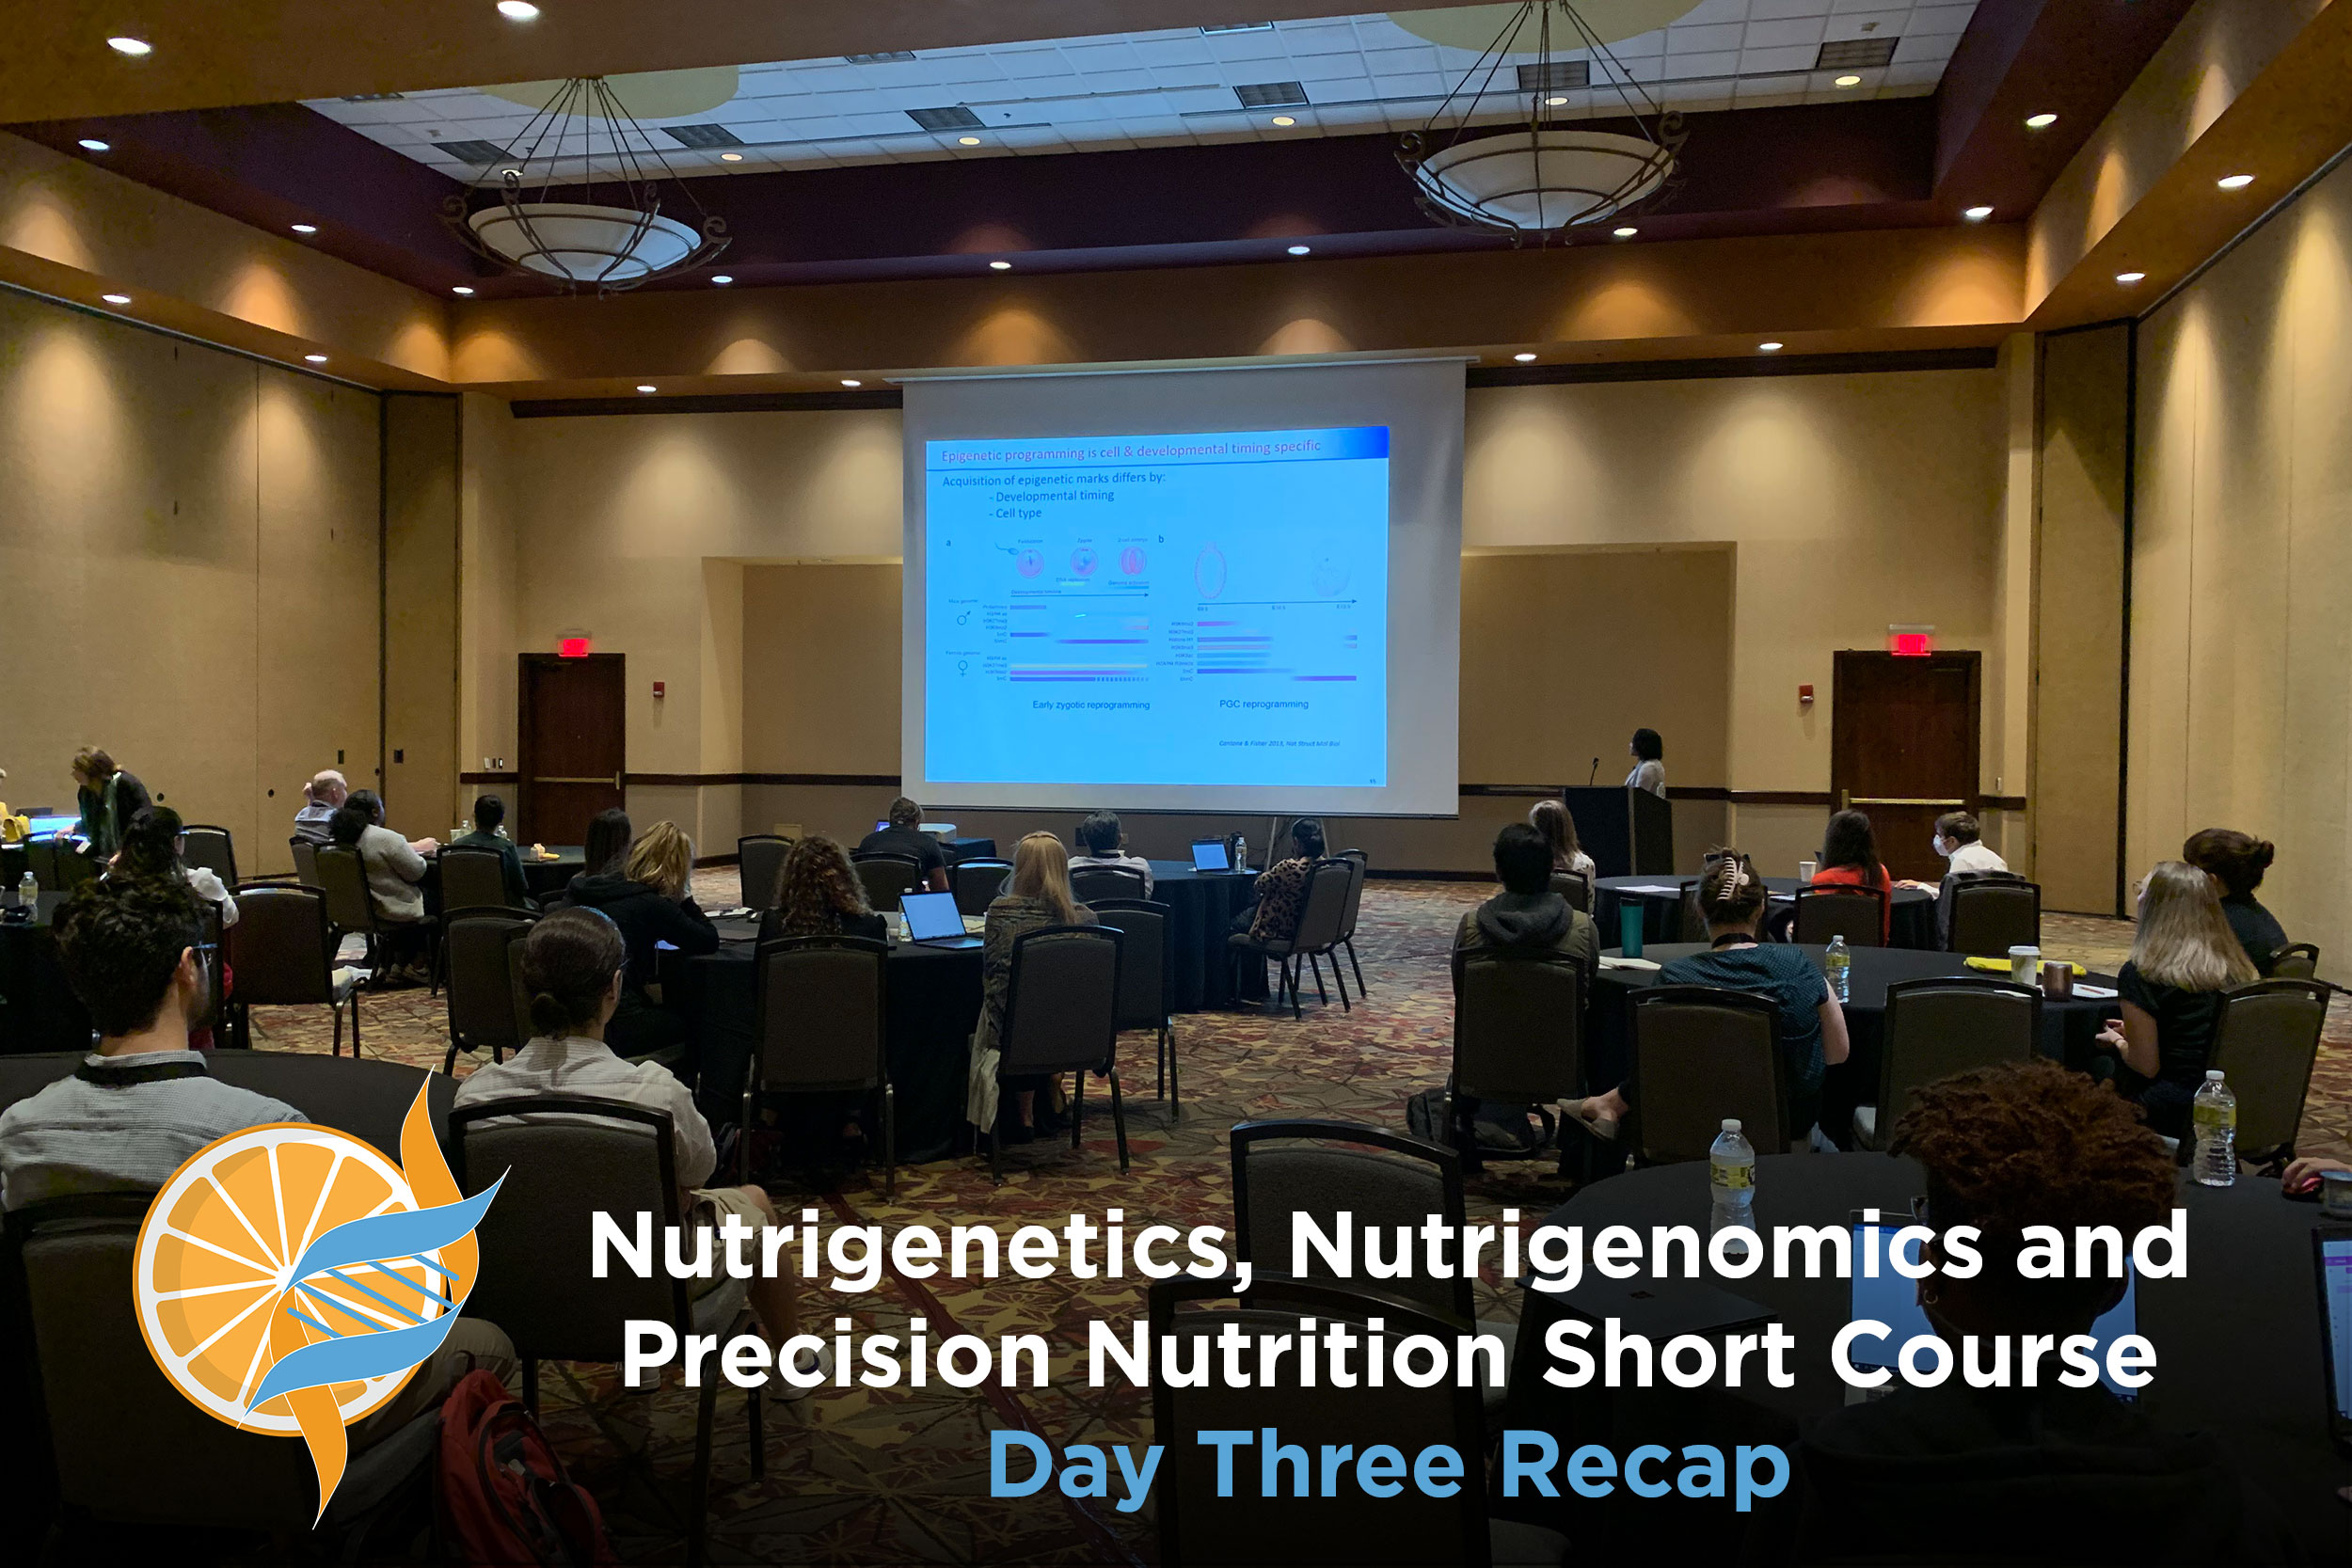 NGx: A short course in Nutrigenetics, Nutrigenomics and Precision Nutrition – Day Three